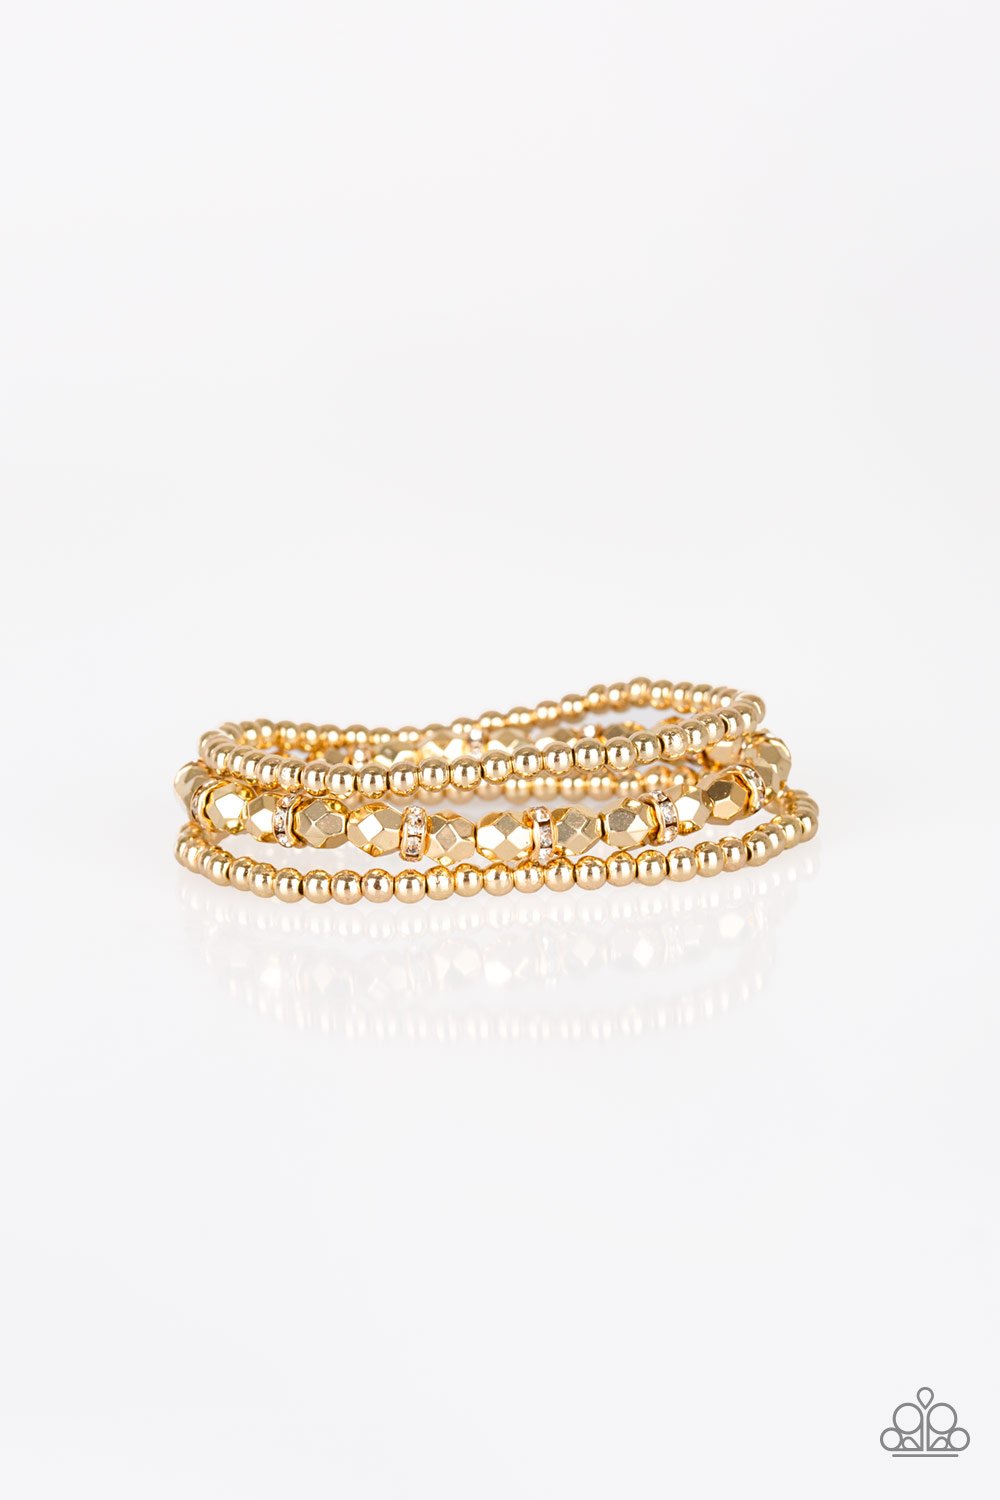 Paparazzi Accessories Let There Beam Light - Gold Bracelets - Lady T Accessories